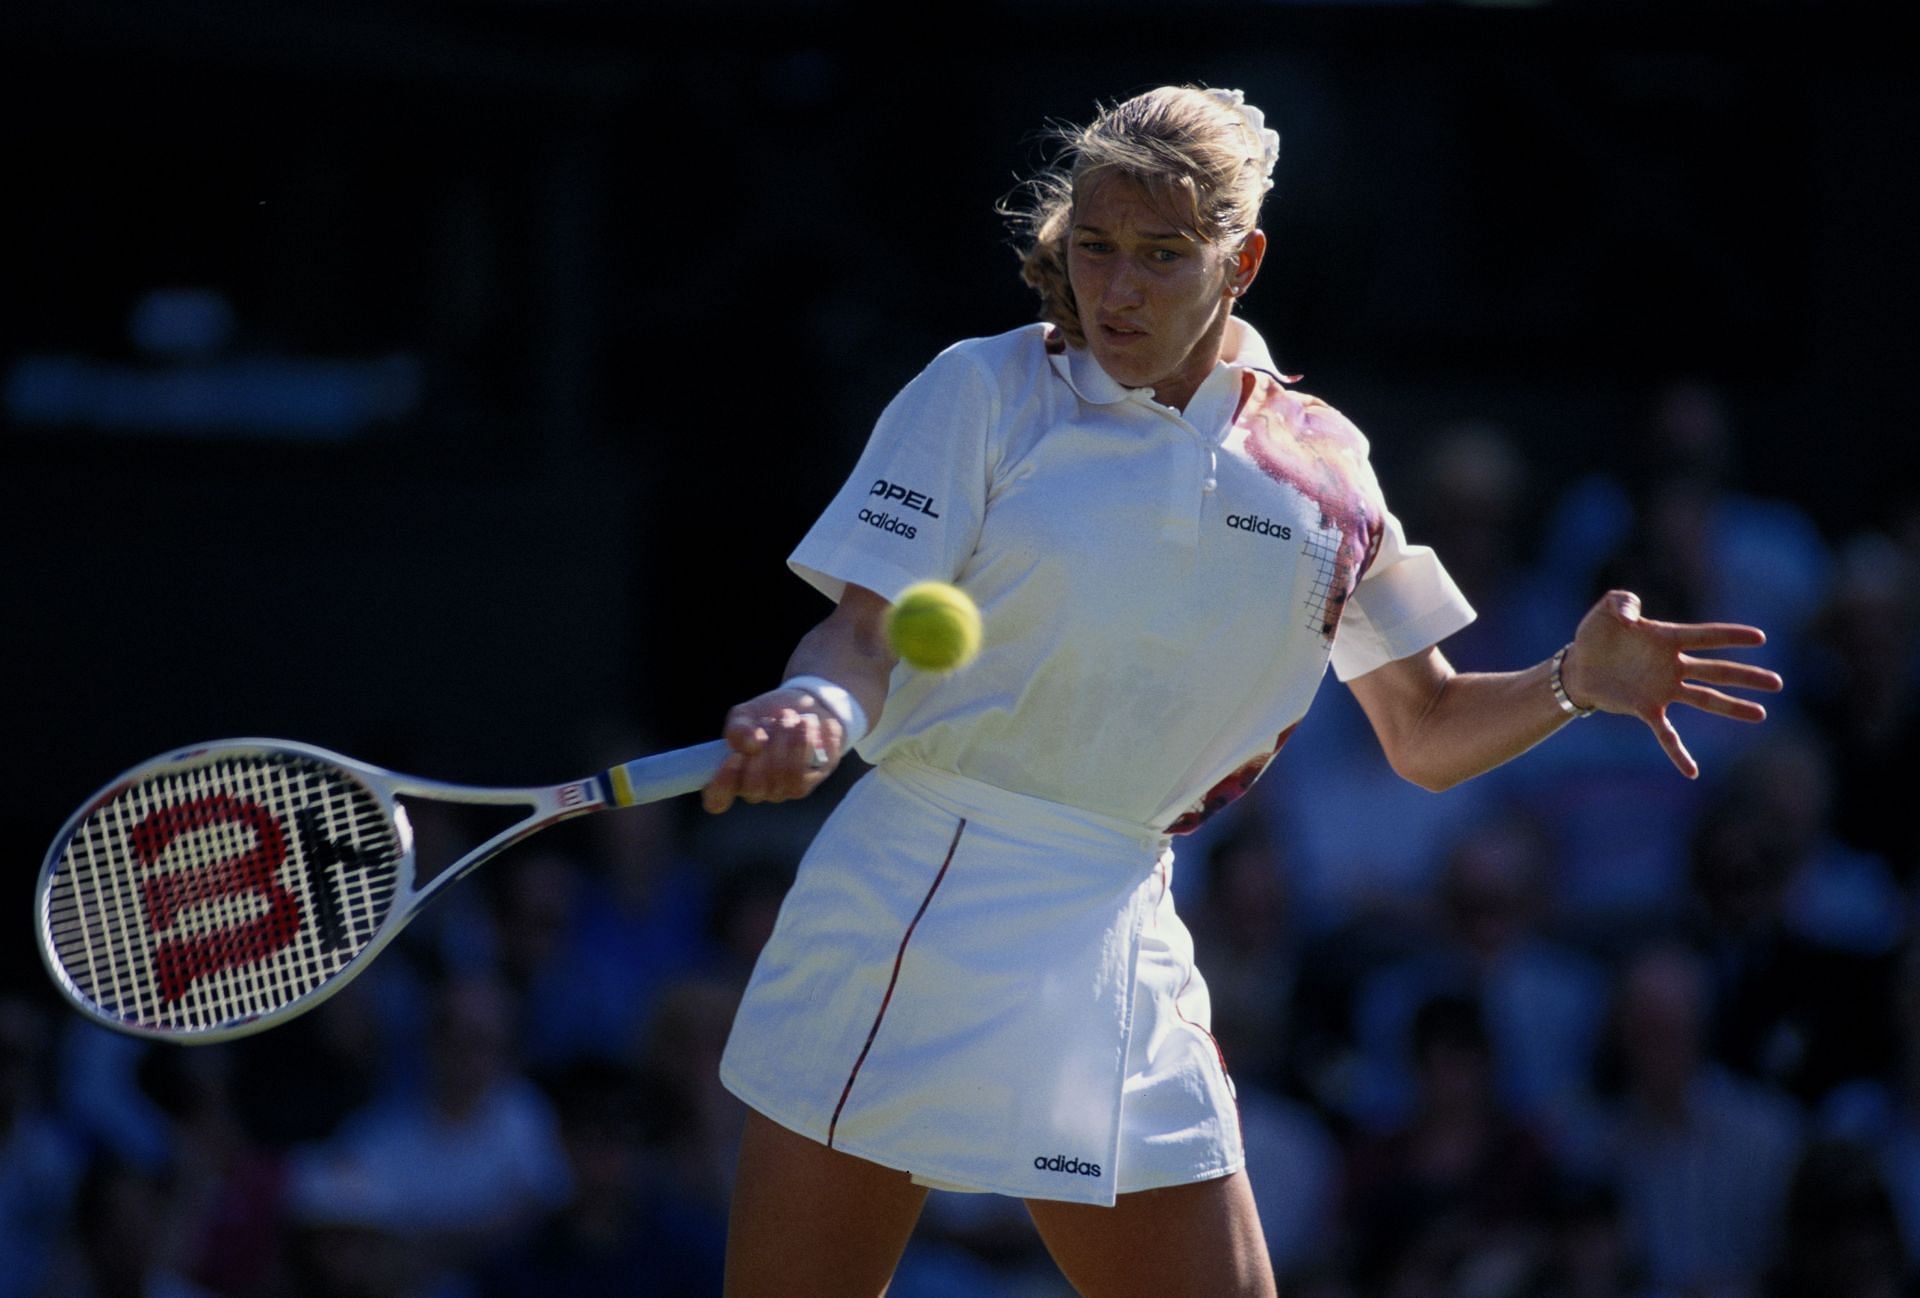 Graf plays a forehand at the Wimbledon Championships